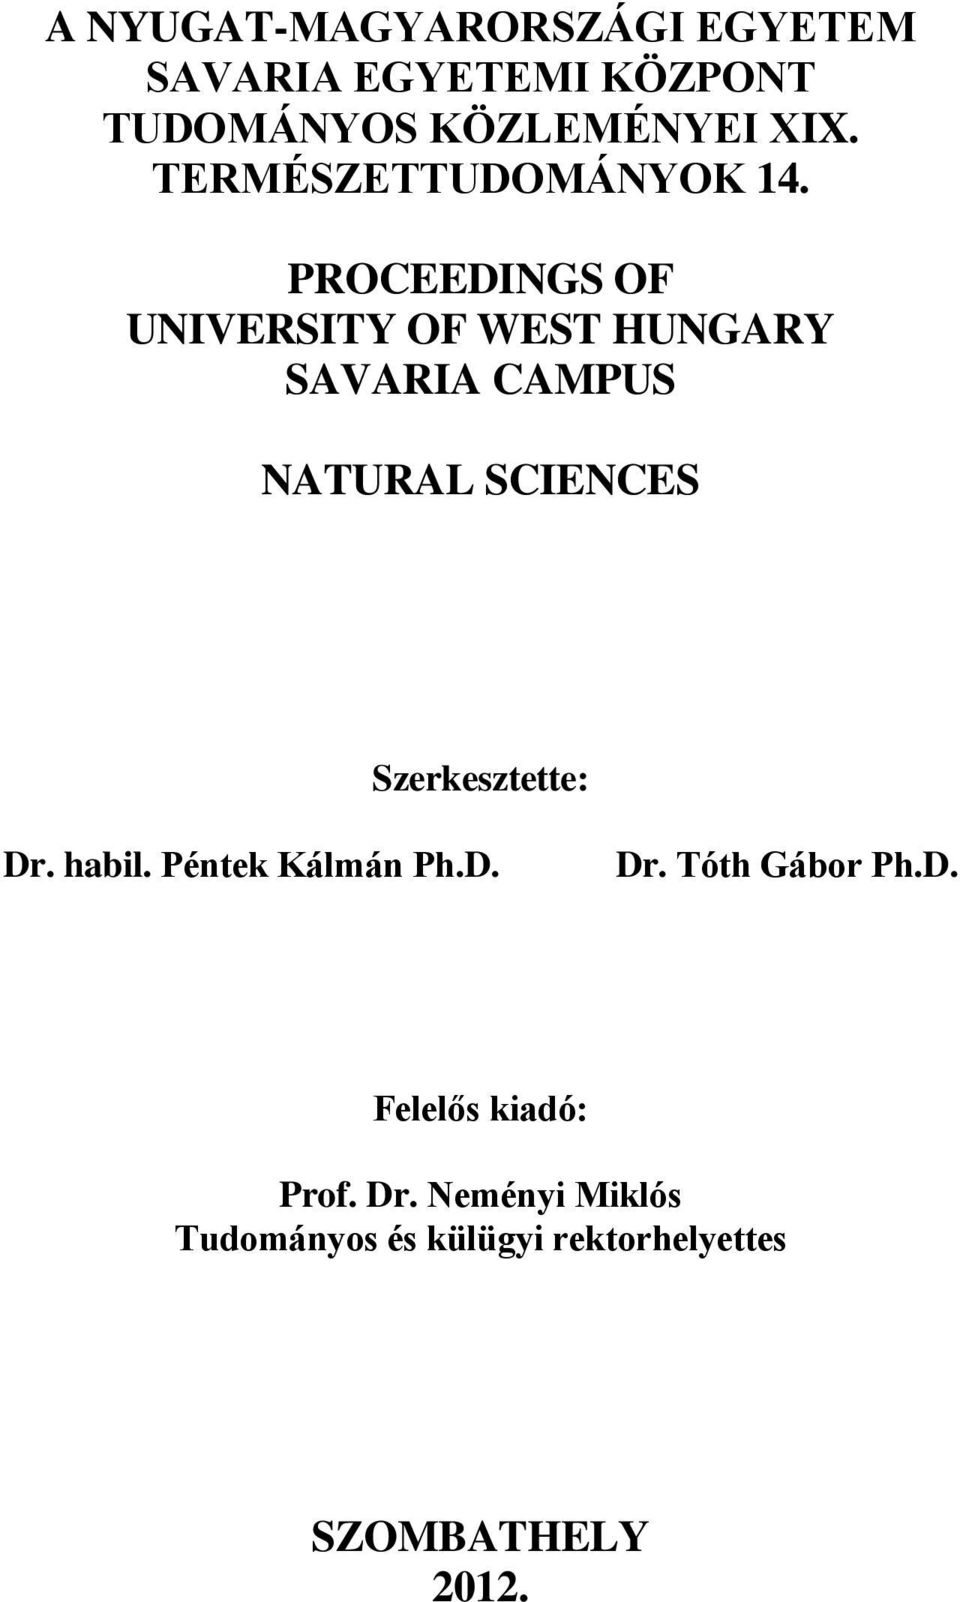 PROCEEDINGS OF UNIVERSITY OF WEST HUNGARY SAVARIA CAMPUS NATURAL SCIENCES